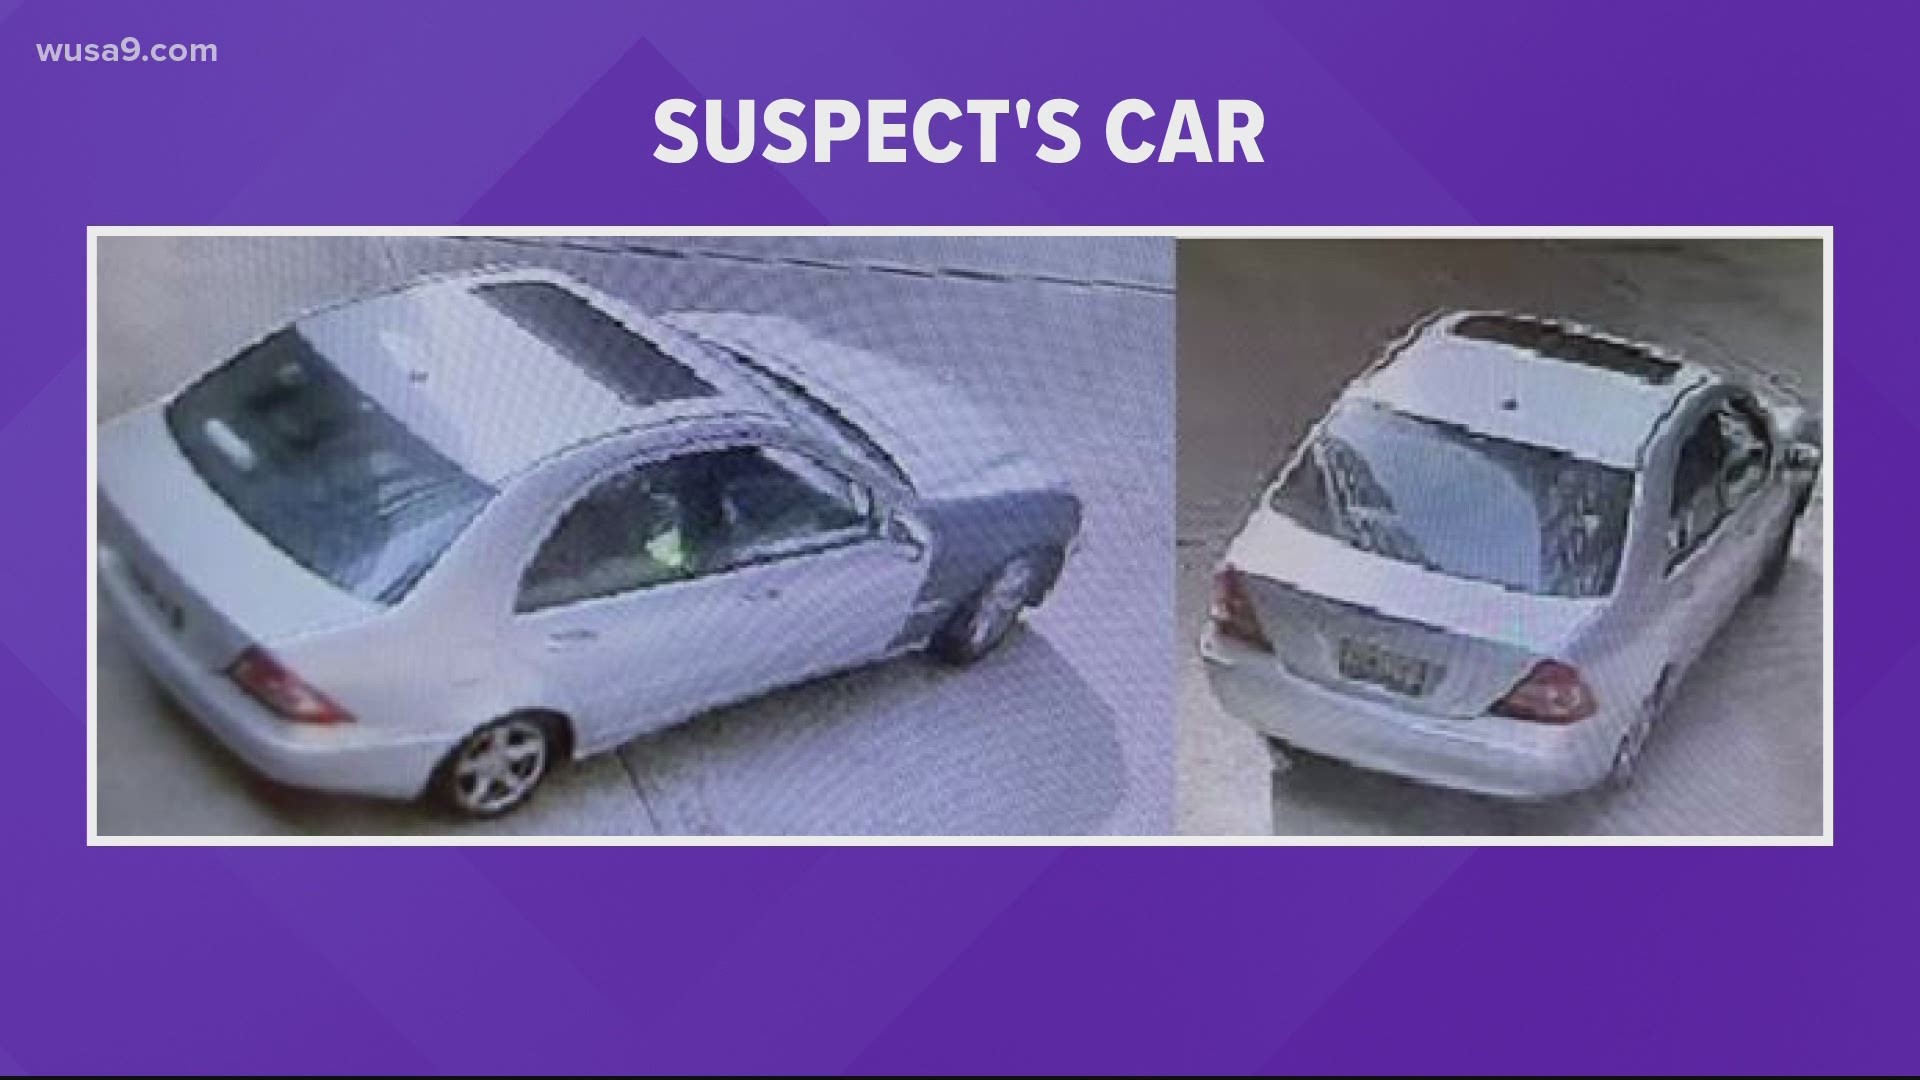 A postal worker was beaten and robbed on Connecticut Ave and K Street while on the job. DC Police are looking for a silver Mercedes Benz.